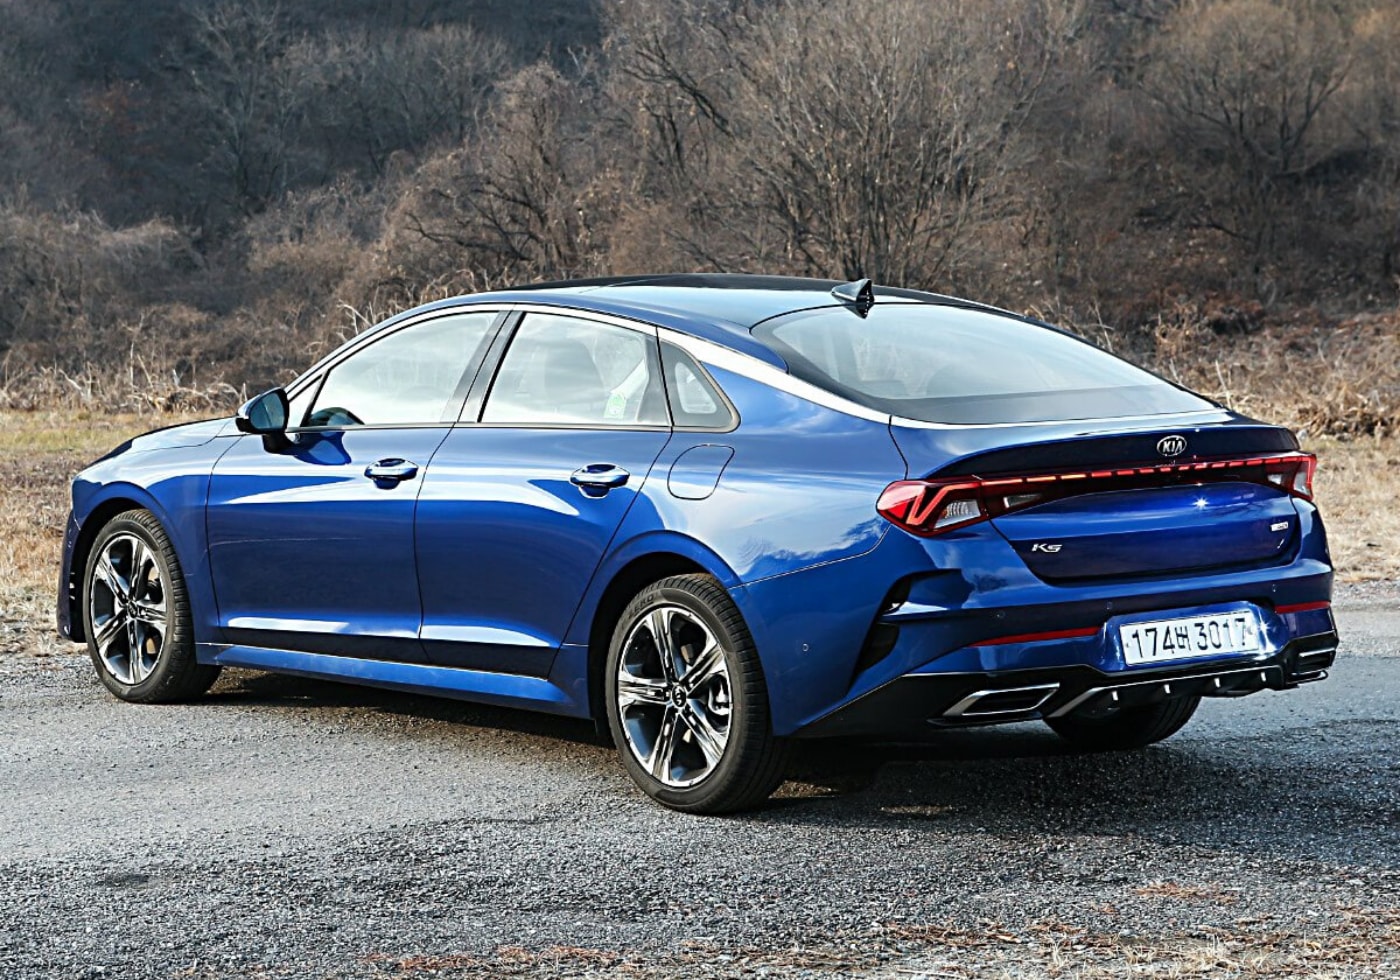 Rear exterior design of the all-new 2021 Kia K5 showing a complete redesign from the 2020 Kia Optima